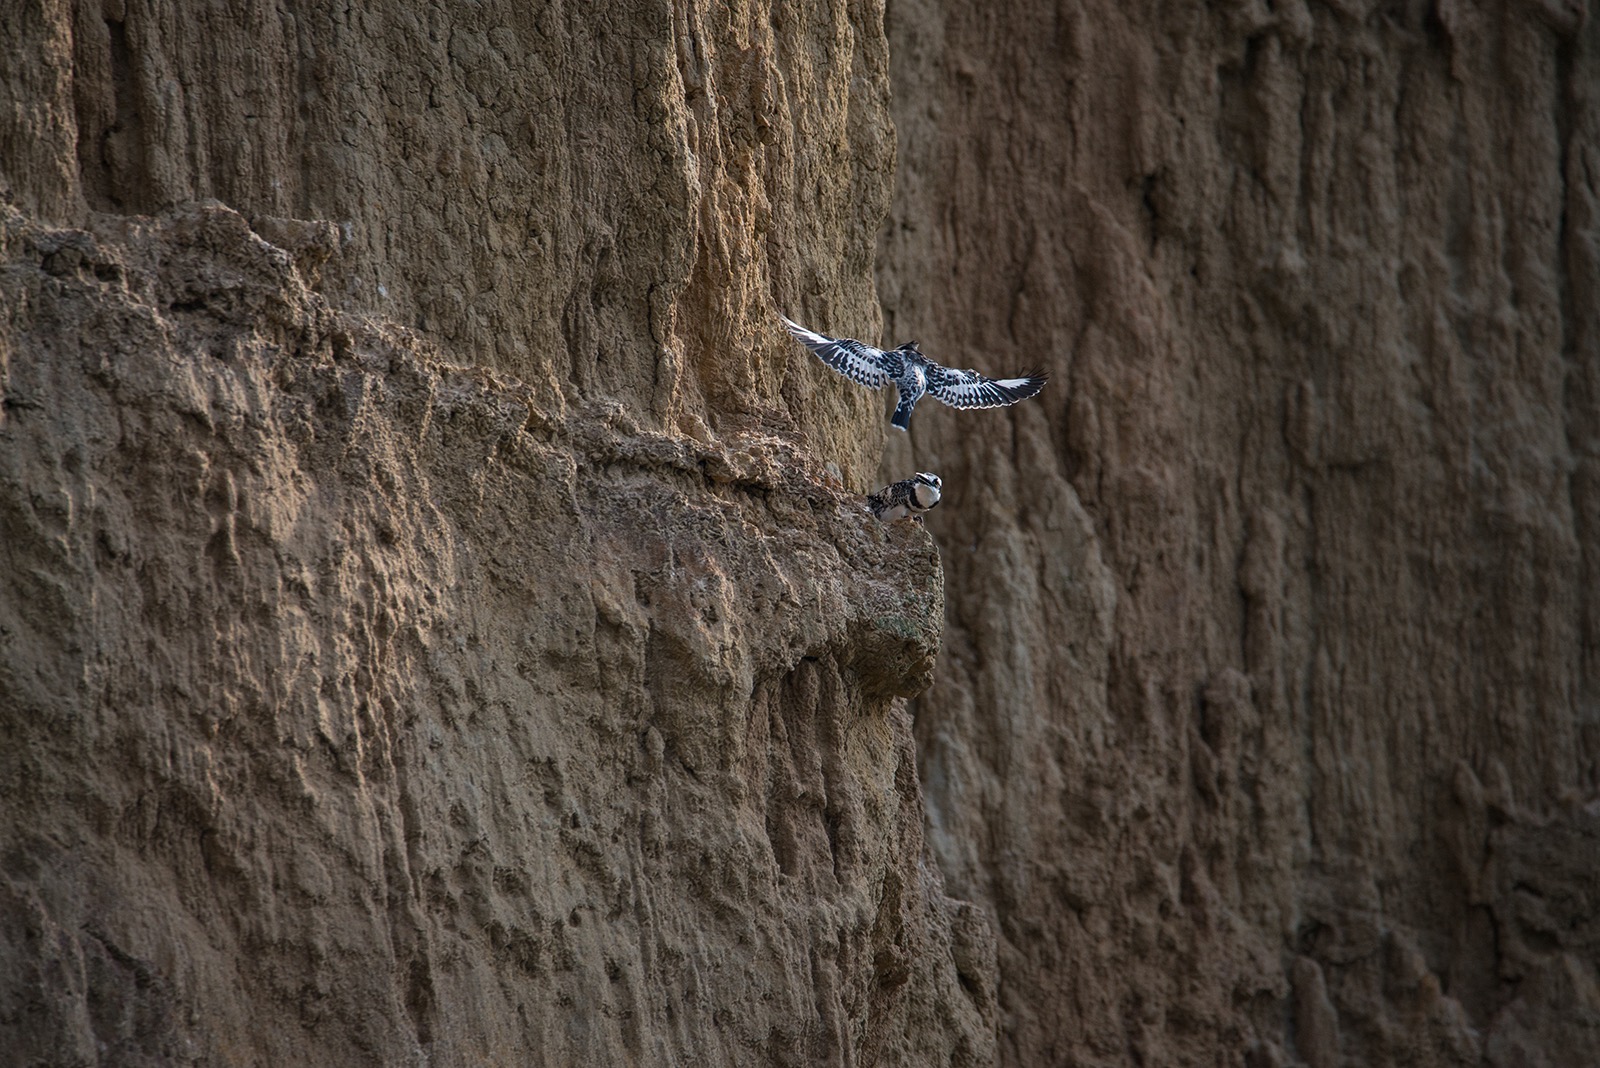 Two pied kingfishers - one in flight and one perched on the wall of a riverbank